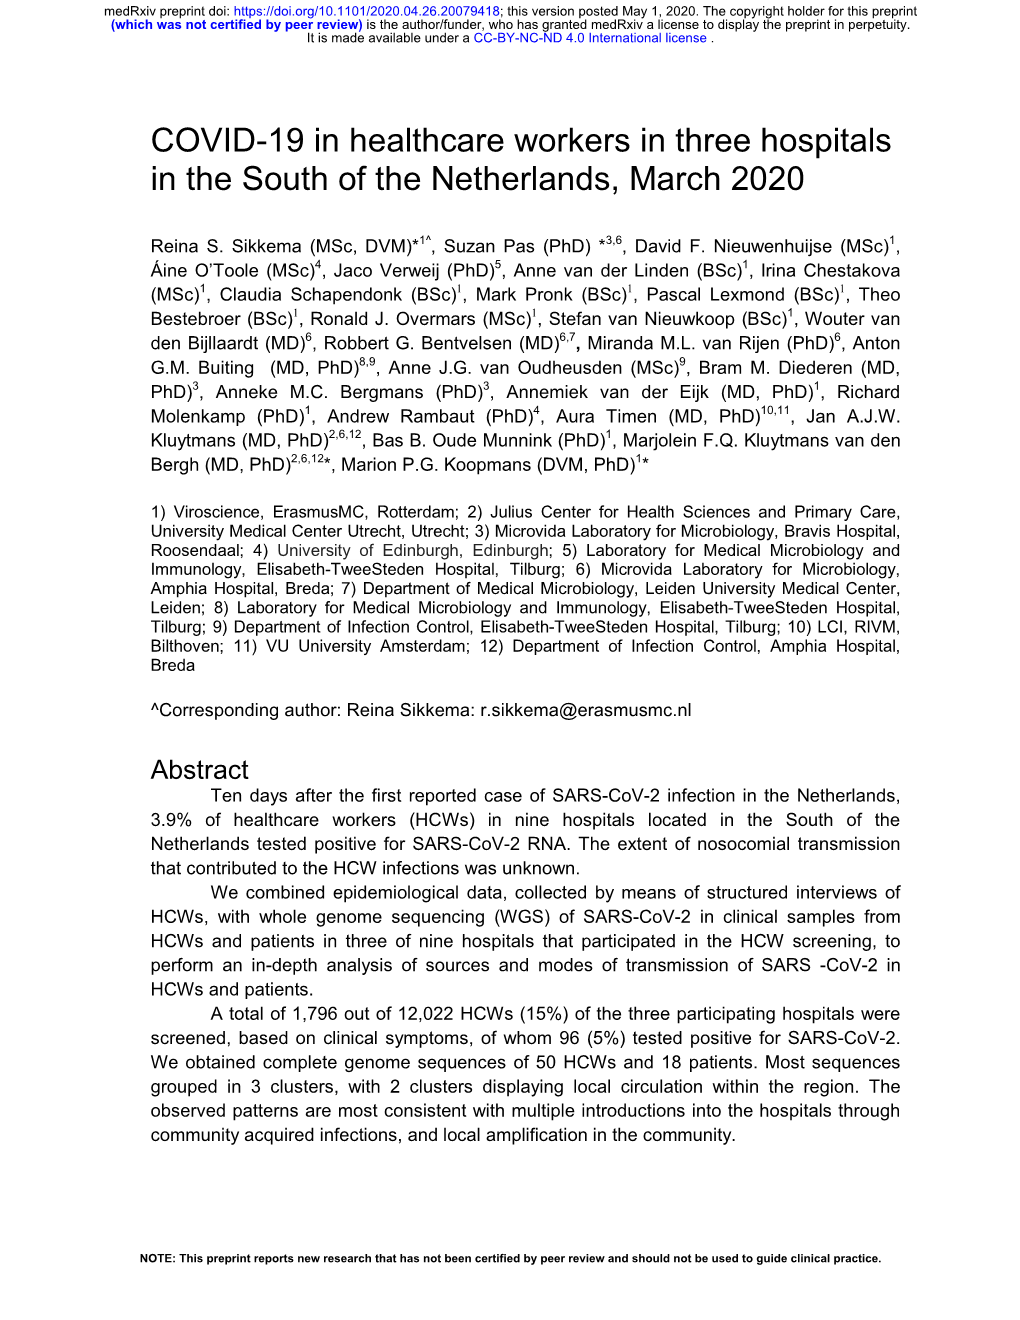 COVID-19 in Healthcare Workers in Three Hospitals in the South of the Netherlands, March 2020